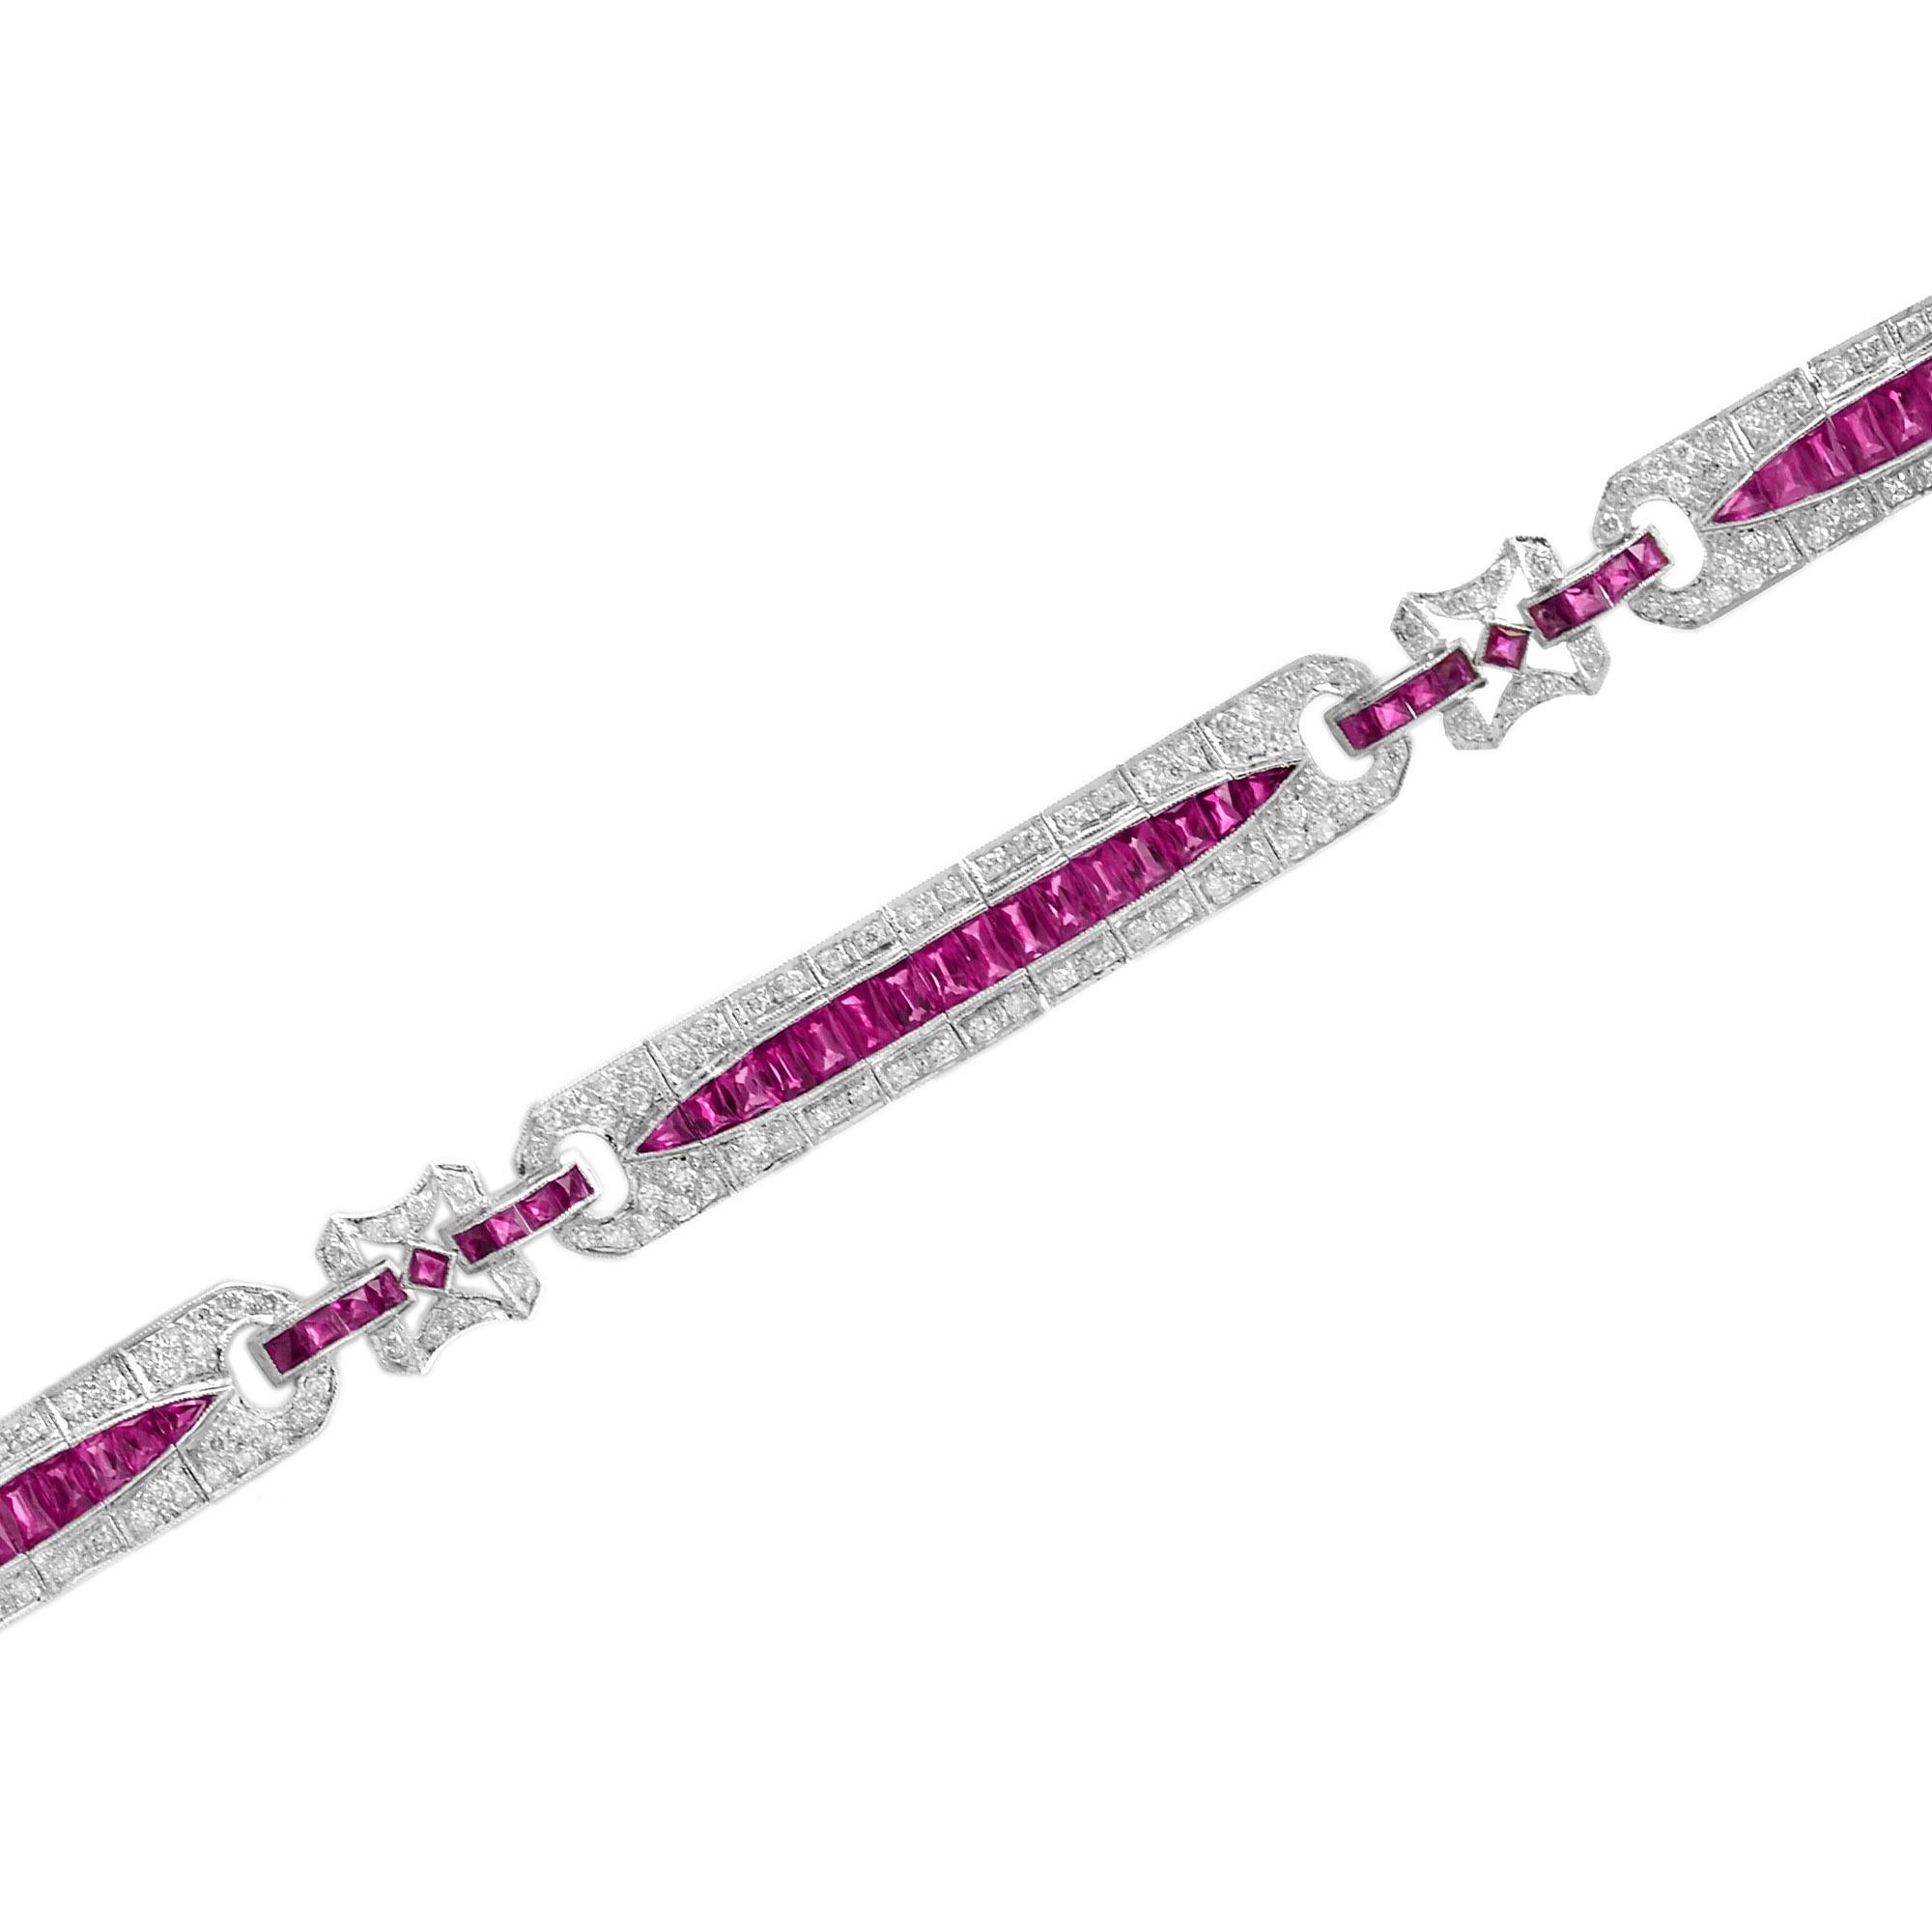 This stunning Art Deco inspired piece is finely crafted from 18k white gold and features an estimated 9.76 carats French cut rubies and 1.50  H-J/SI round brilliant cut diamonds. This wonderful piece is a must-have for any Art Deco